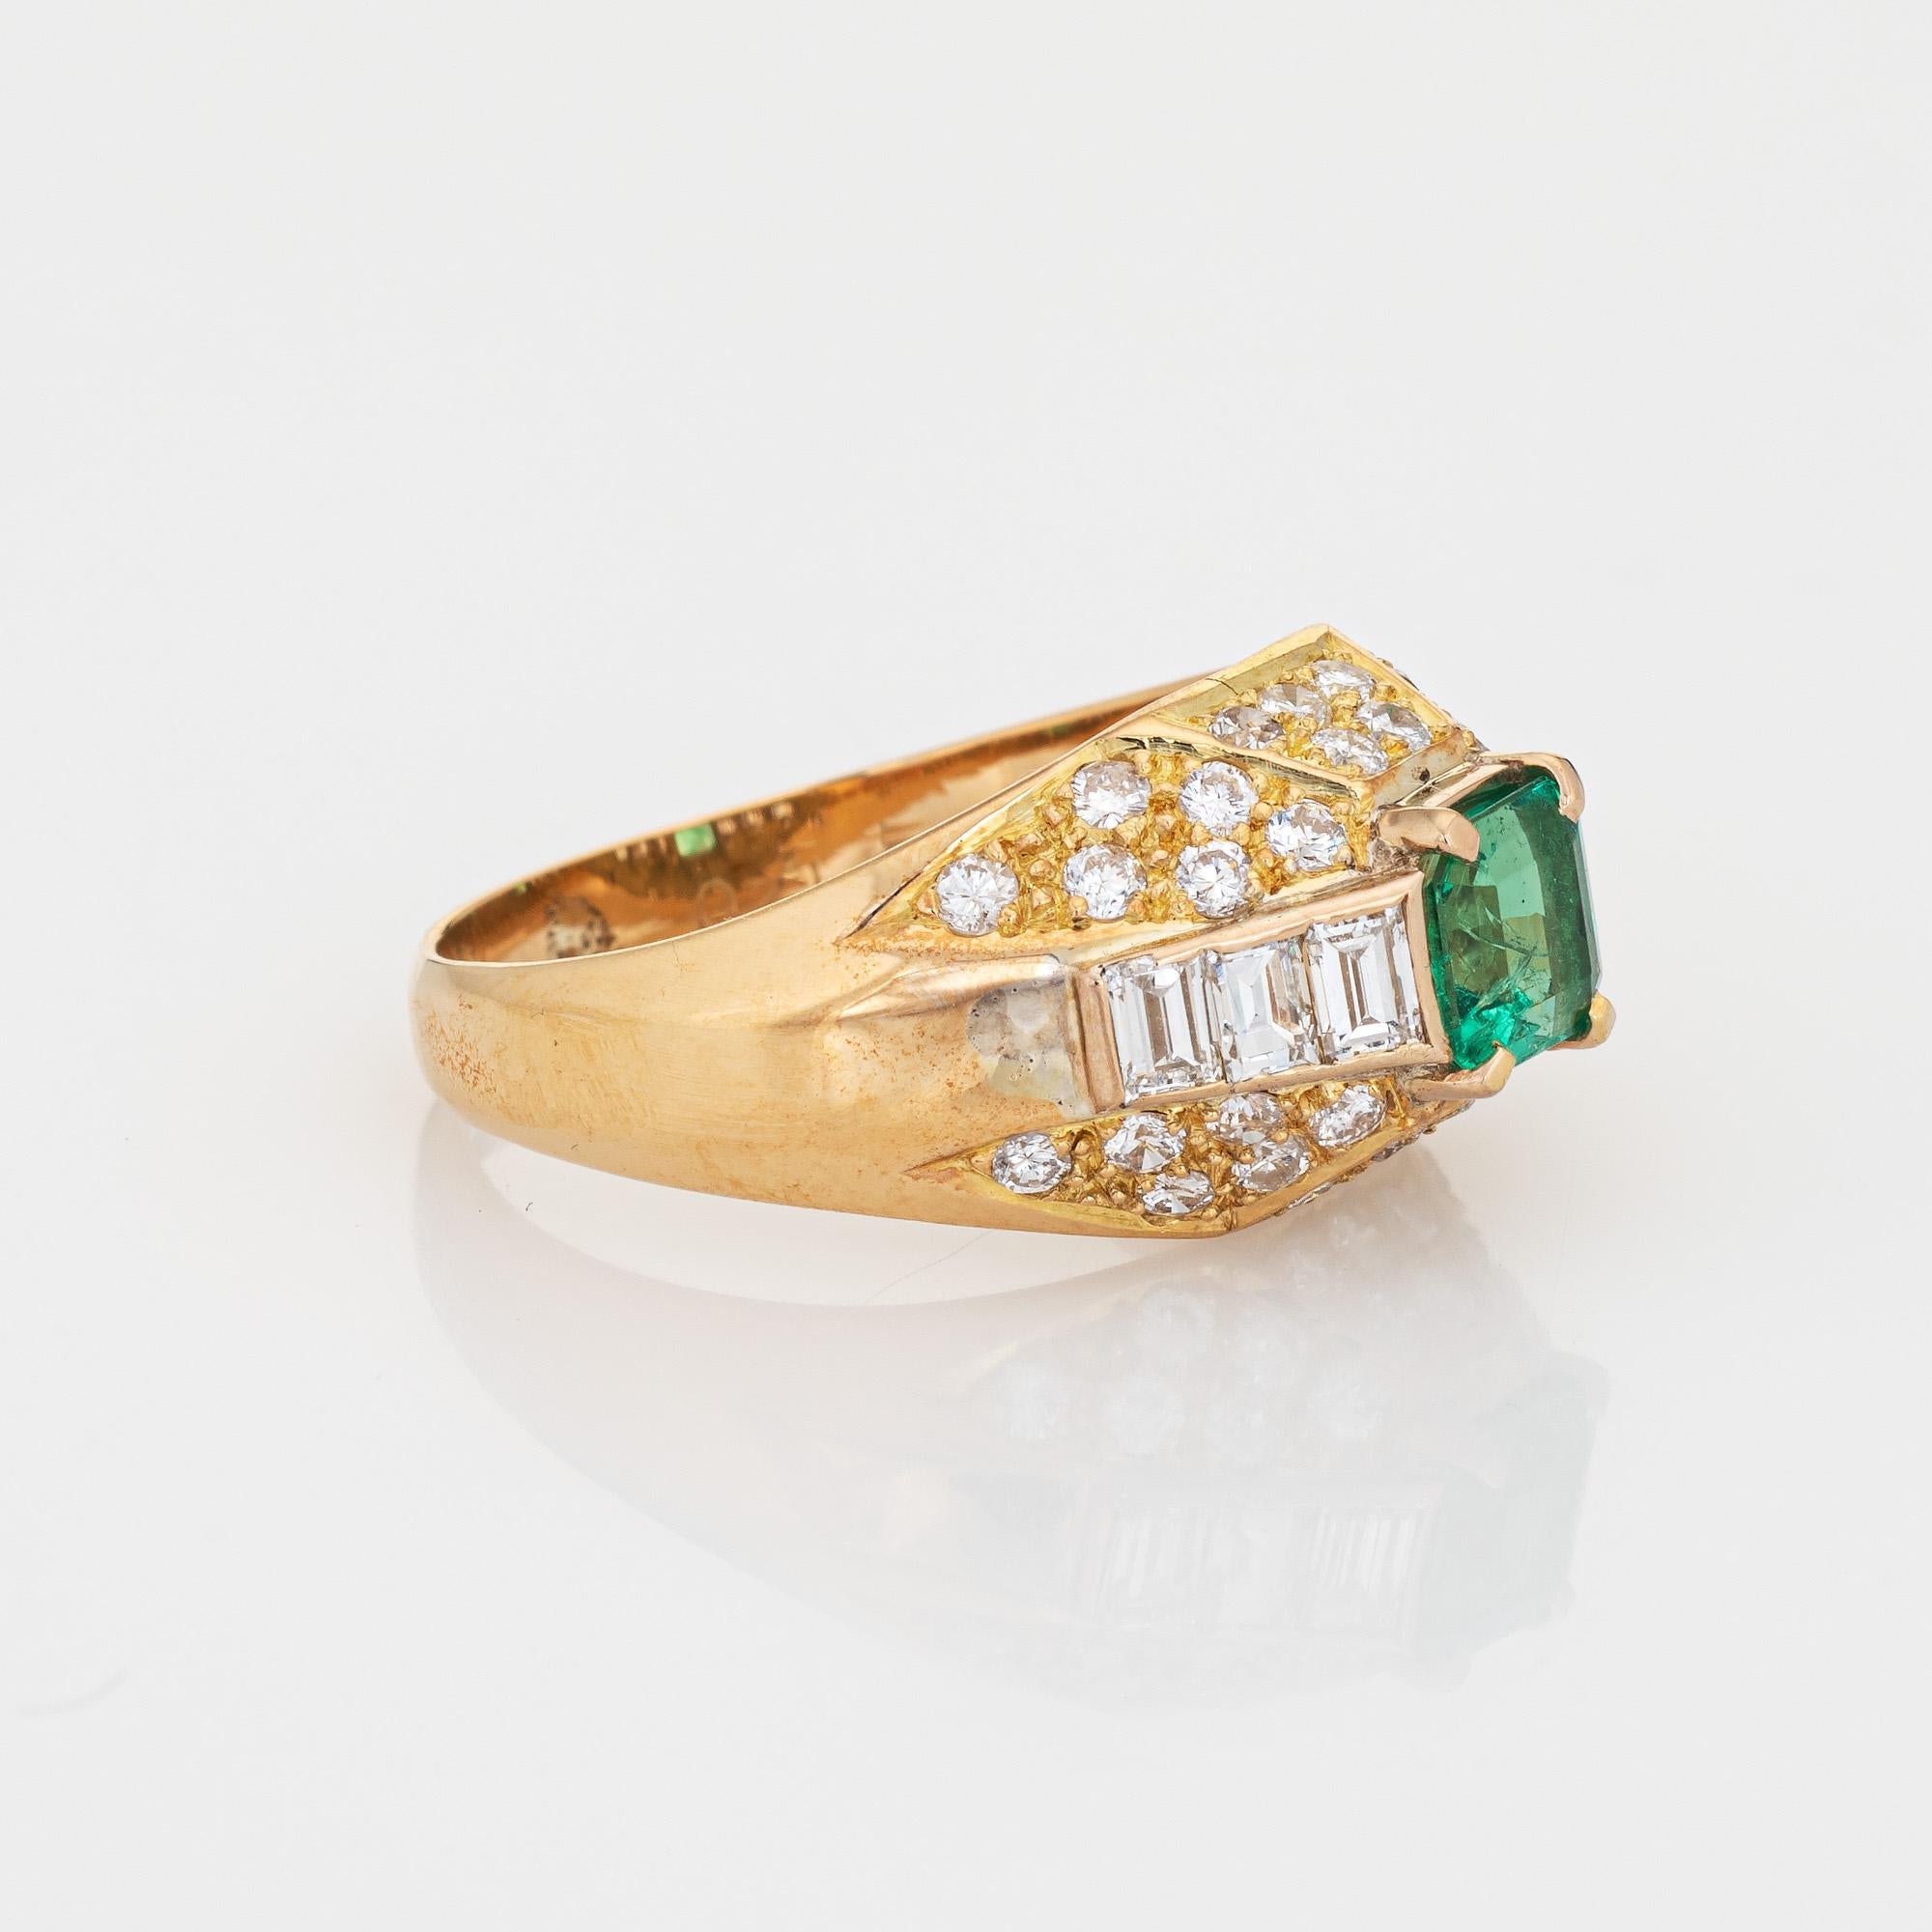 Modern Emerald Diamond Ring Vintage 18k Yellow Gold Dome Gemstone Engagement For Sale